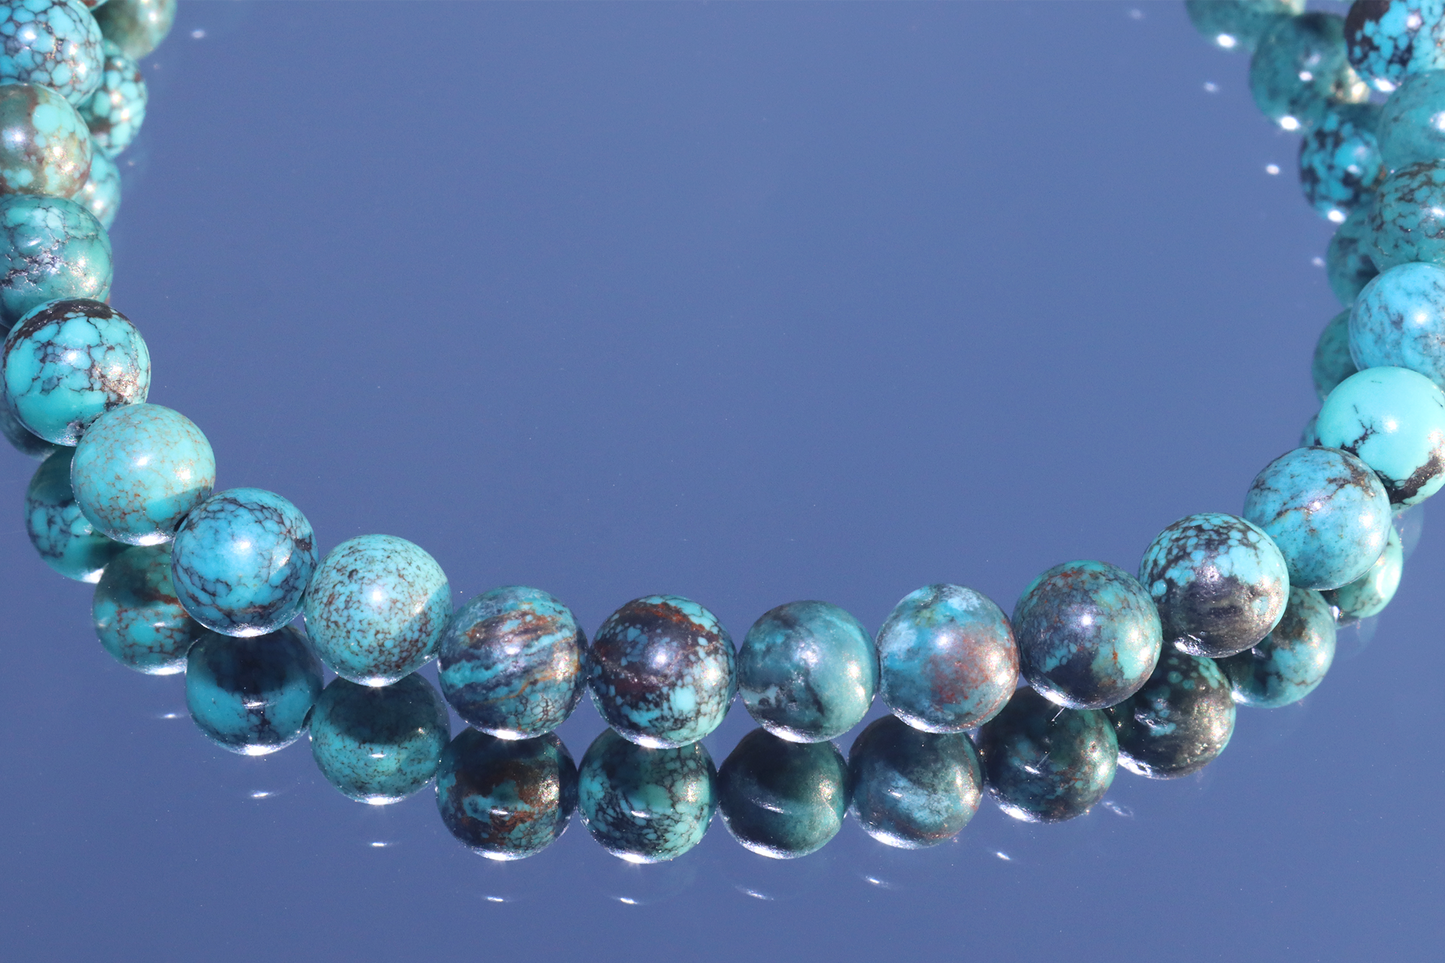 Natural Sonoran Turquoise Infinity Bracelet